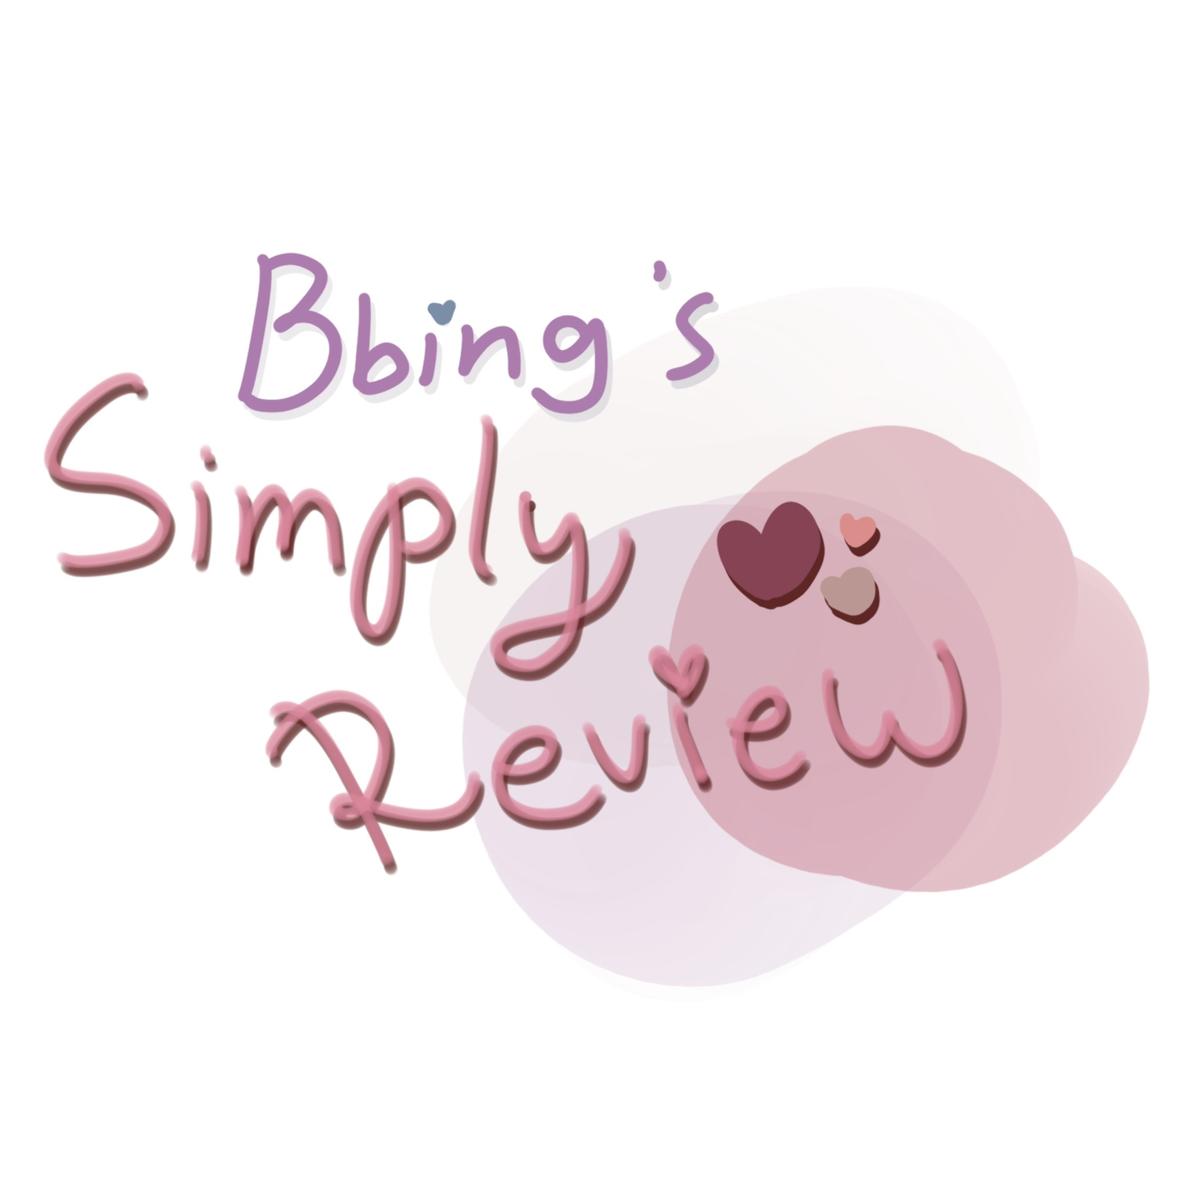 Bbing’s Review